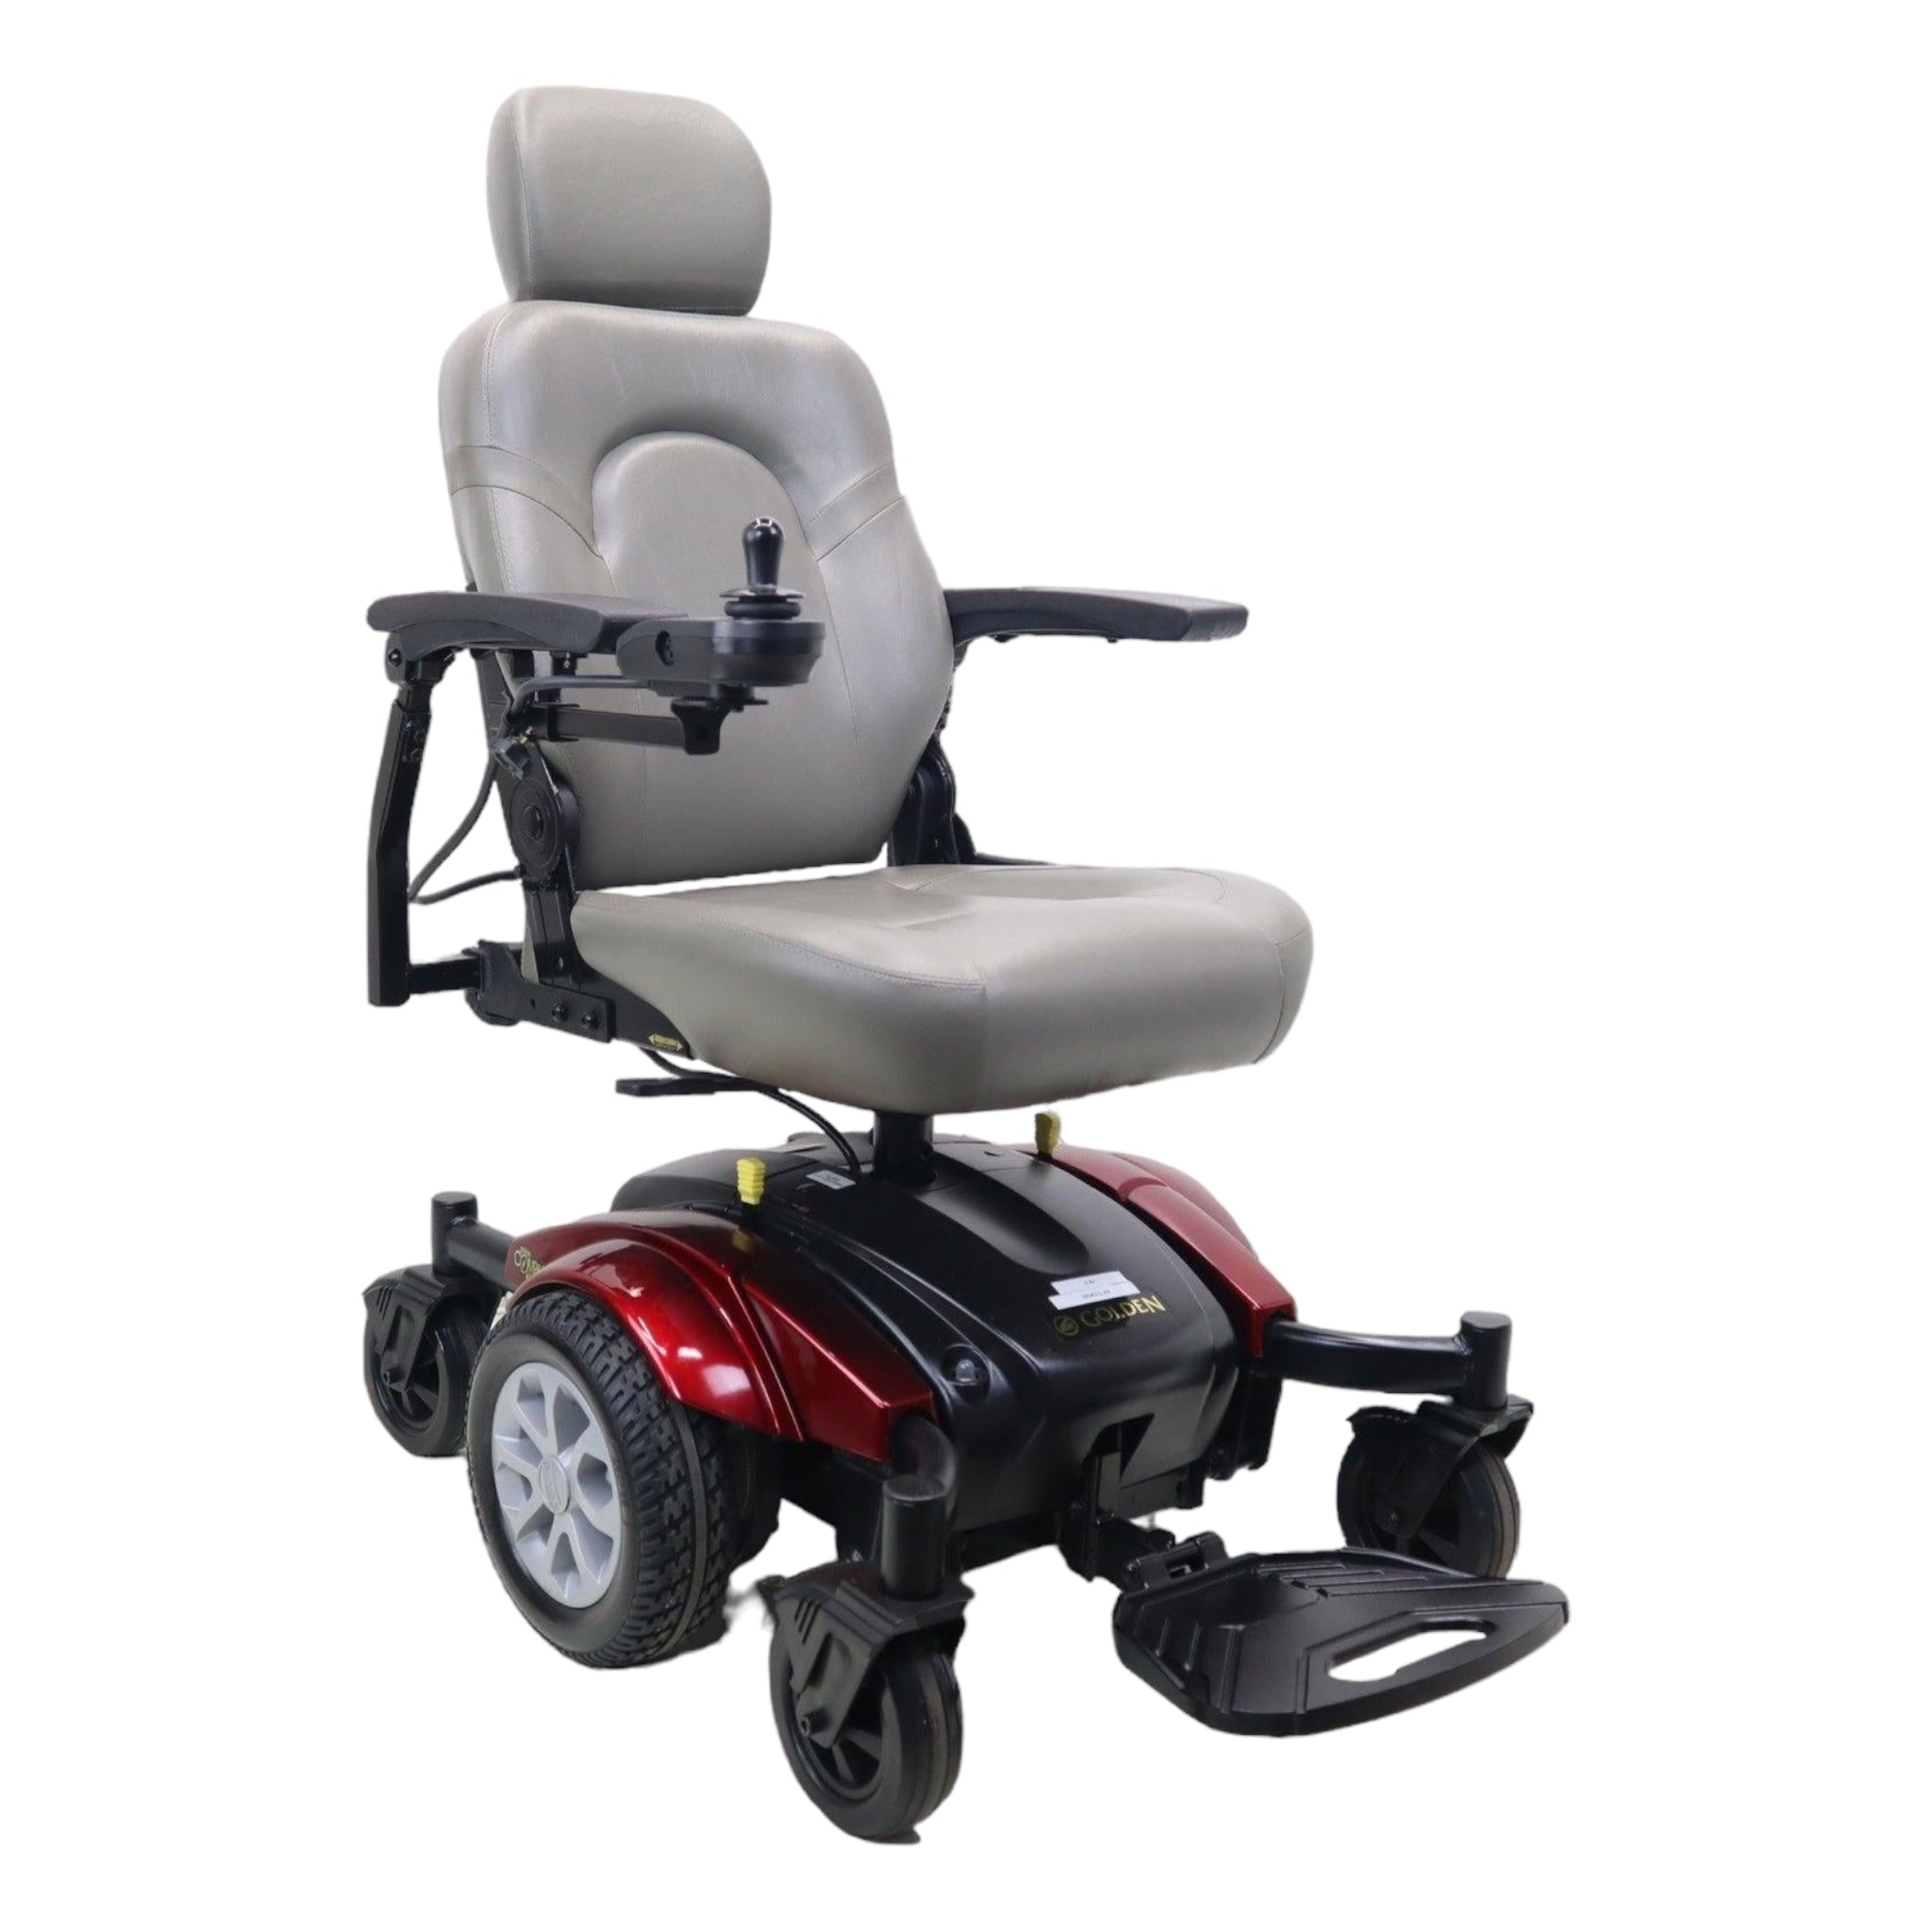 Right side view of red Golden Technologies Compass Sport power chair